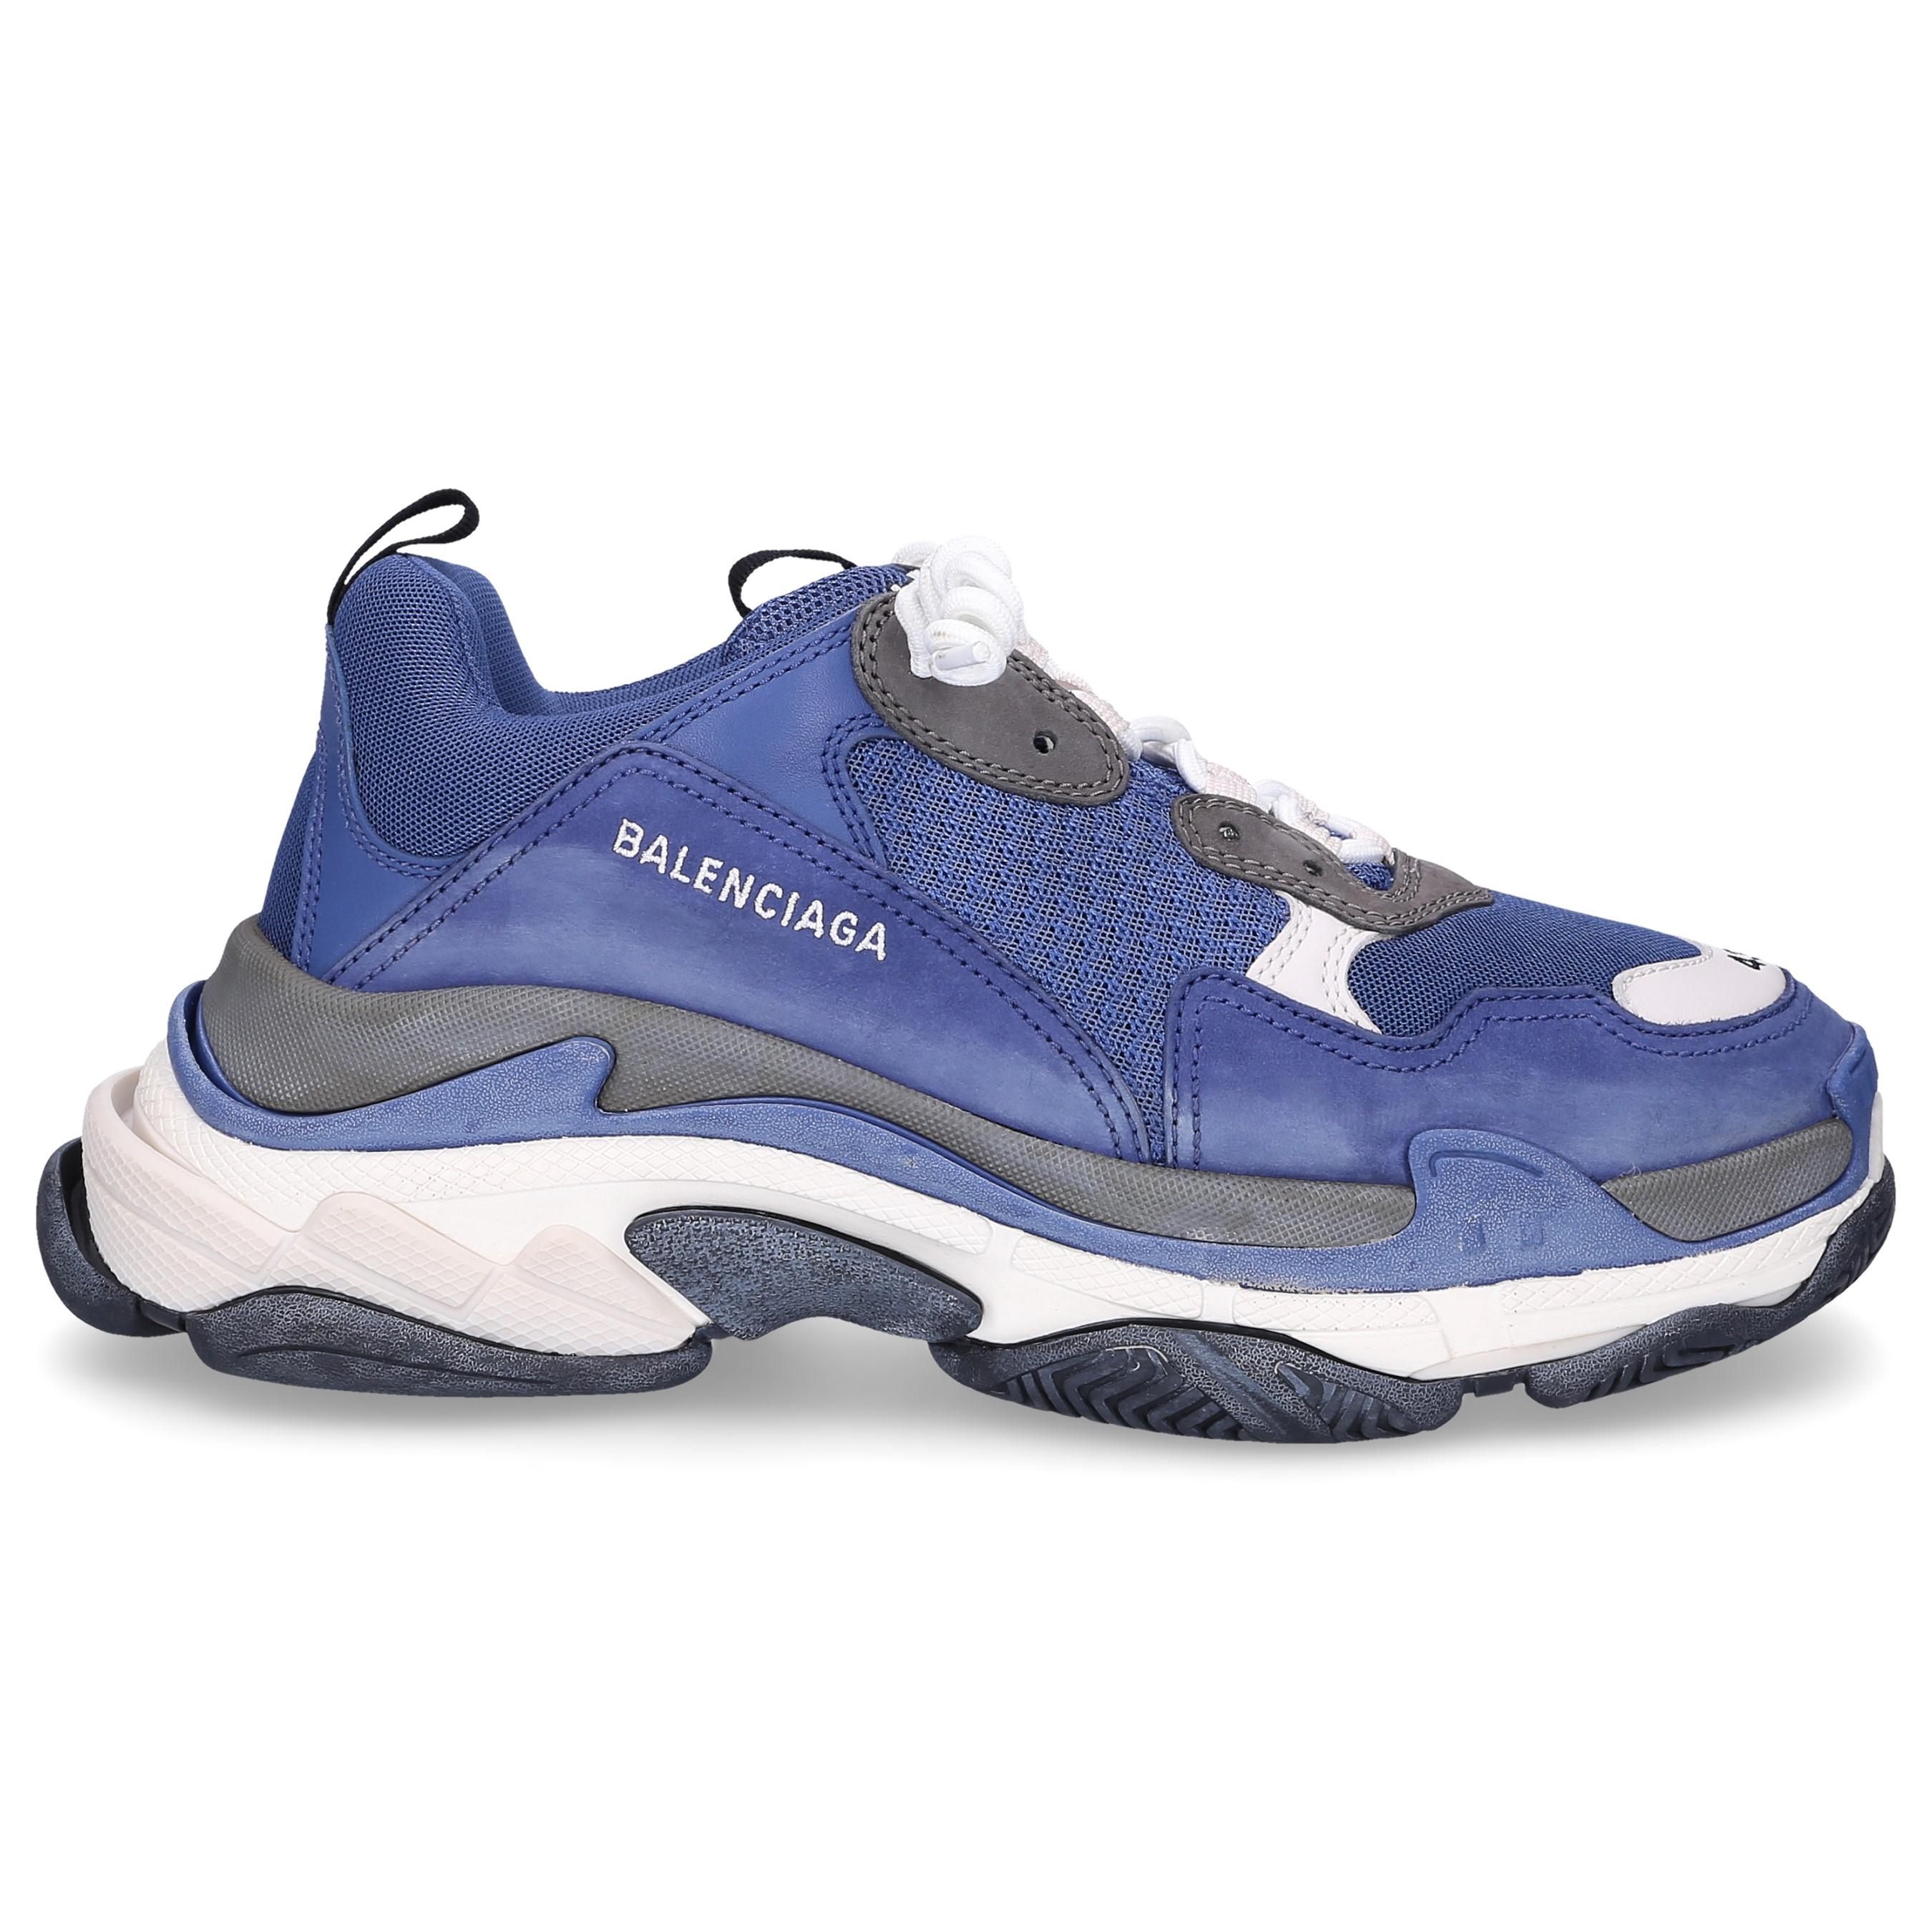 Balenciaga Suede Leather Sneakers Triple S in Navy (Blue